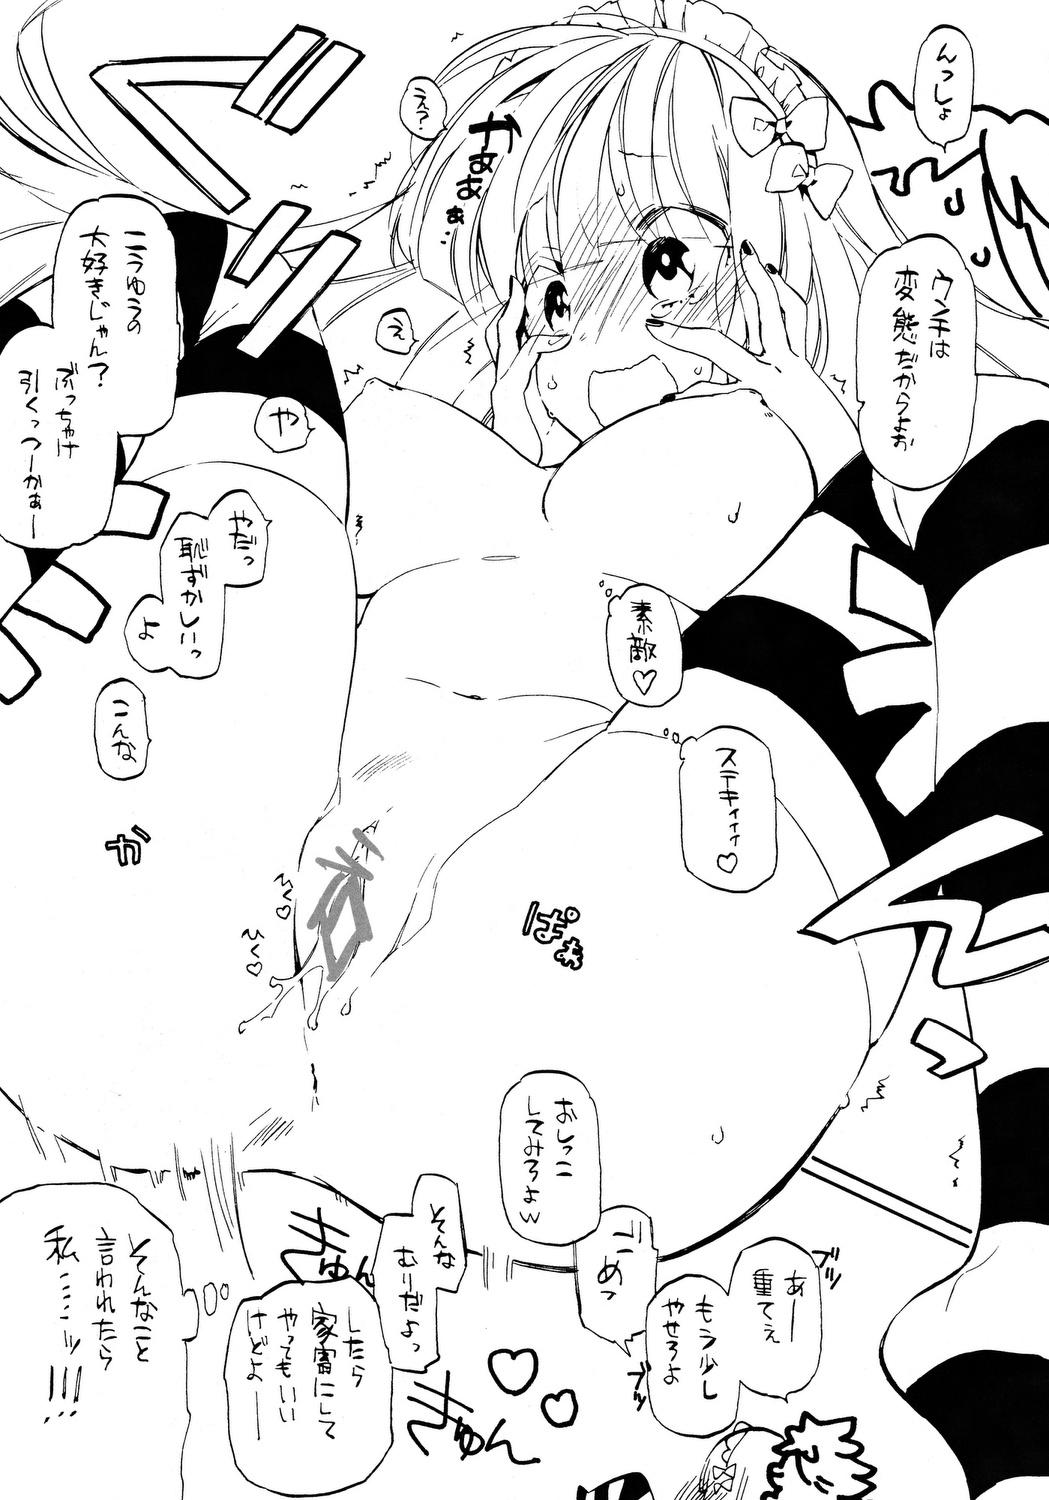 Teens Honey Honey - Panty and stocking with garterbelt Room - Page 11